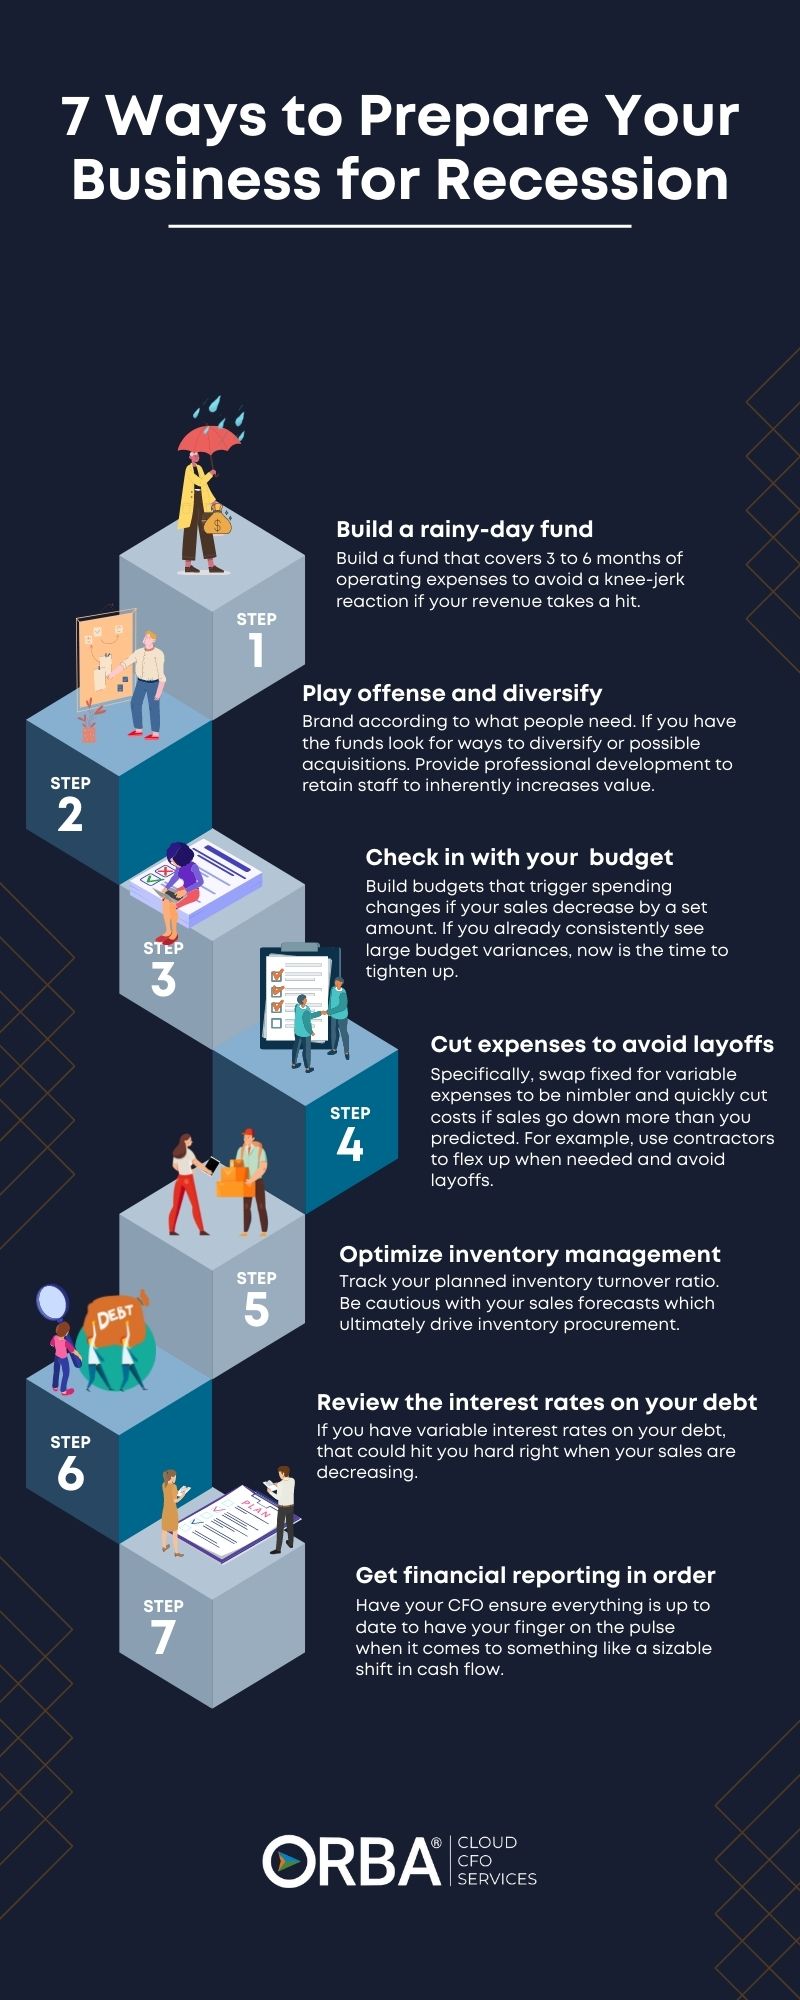 7 ways to prepare business for recession infographic with people depiciting the 7 steps 